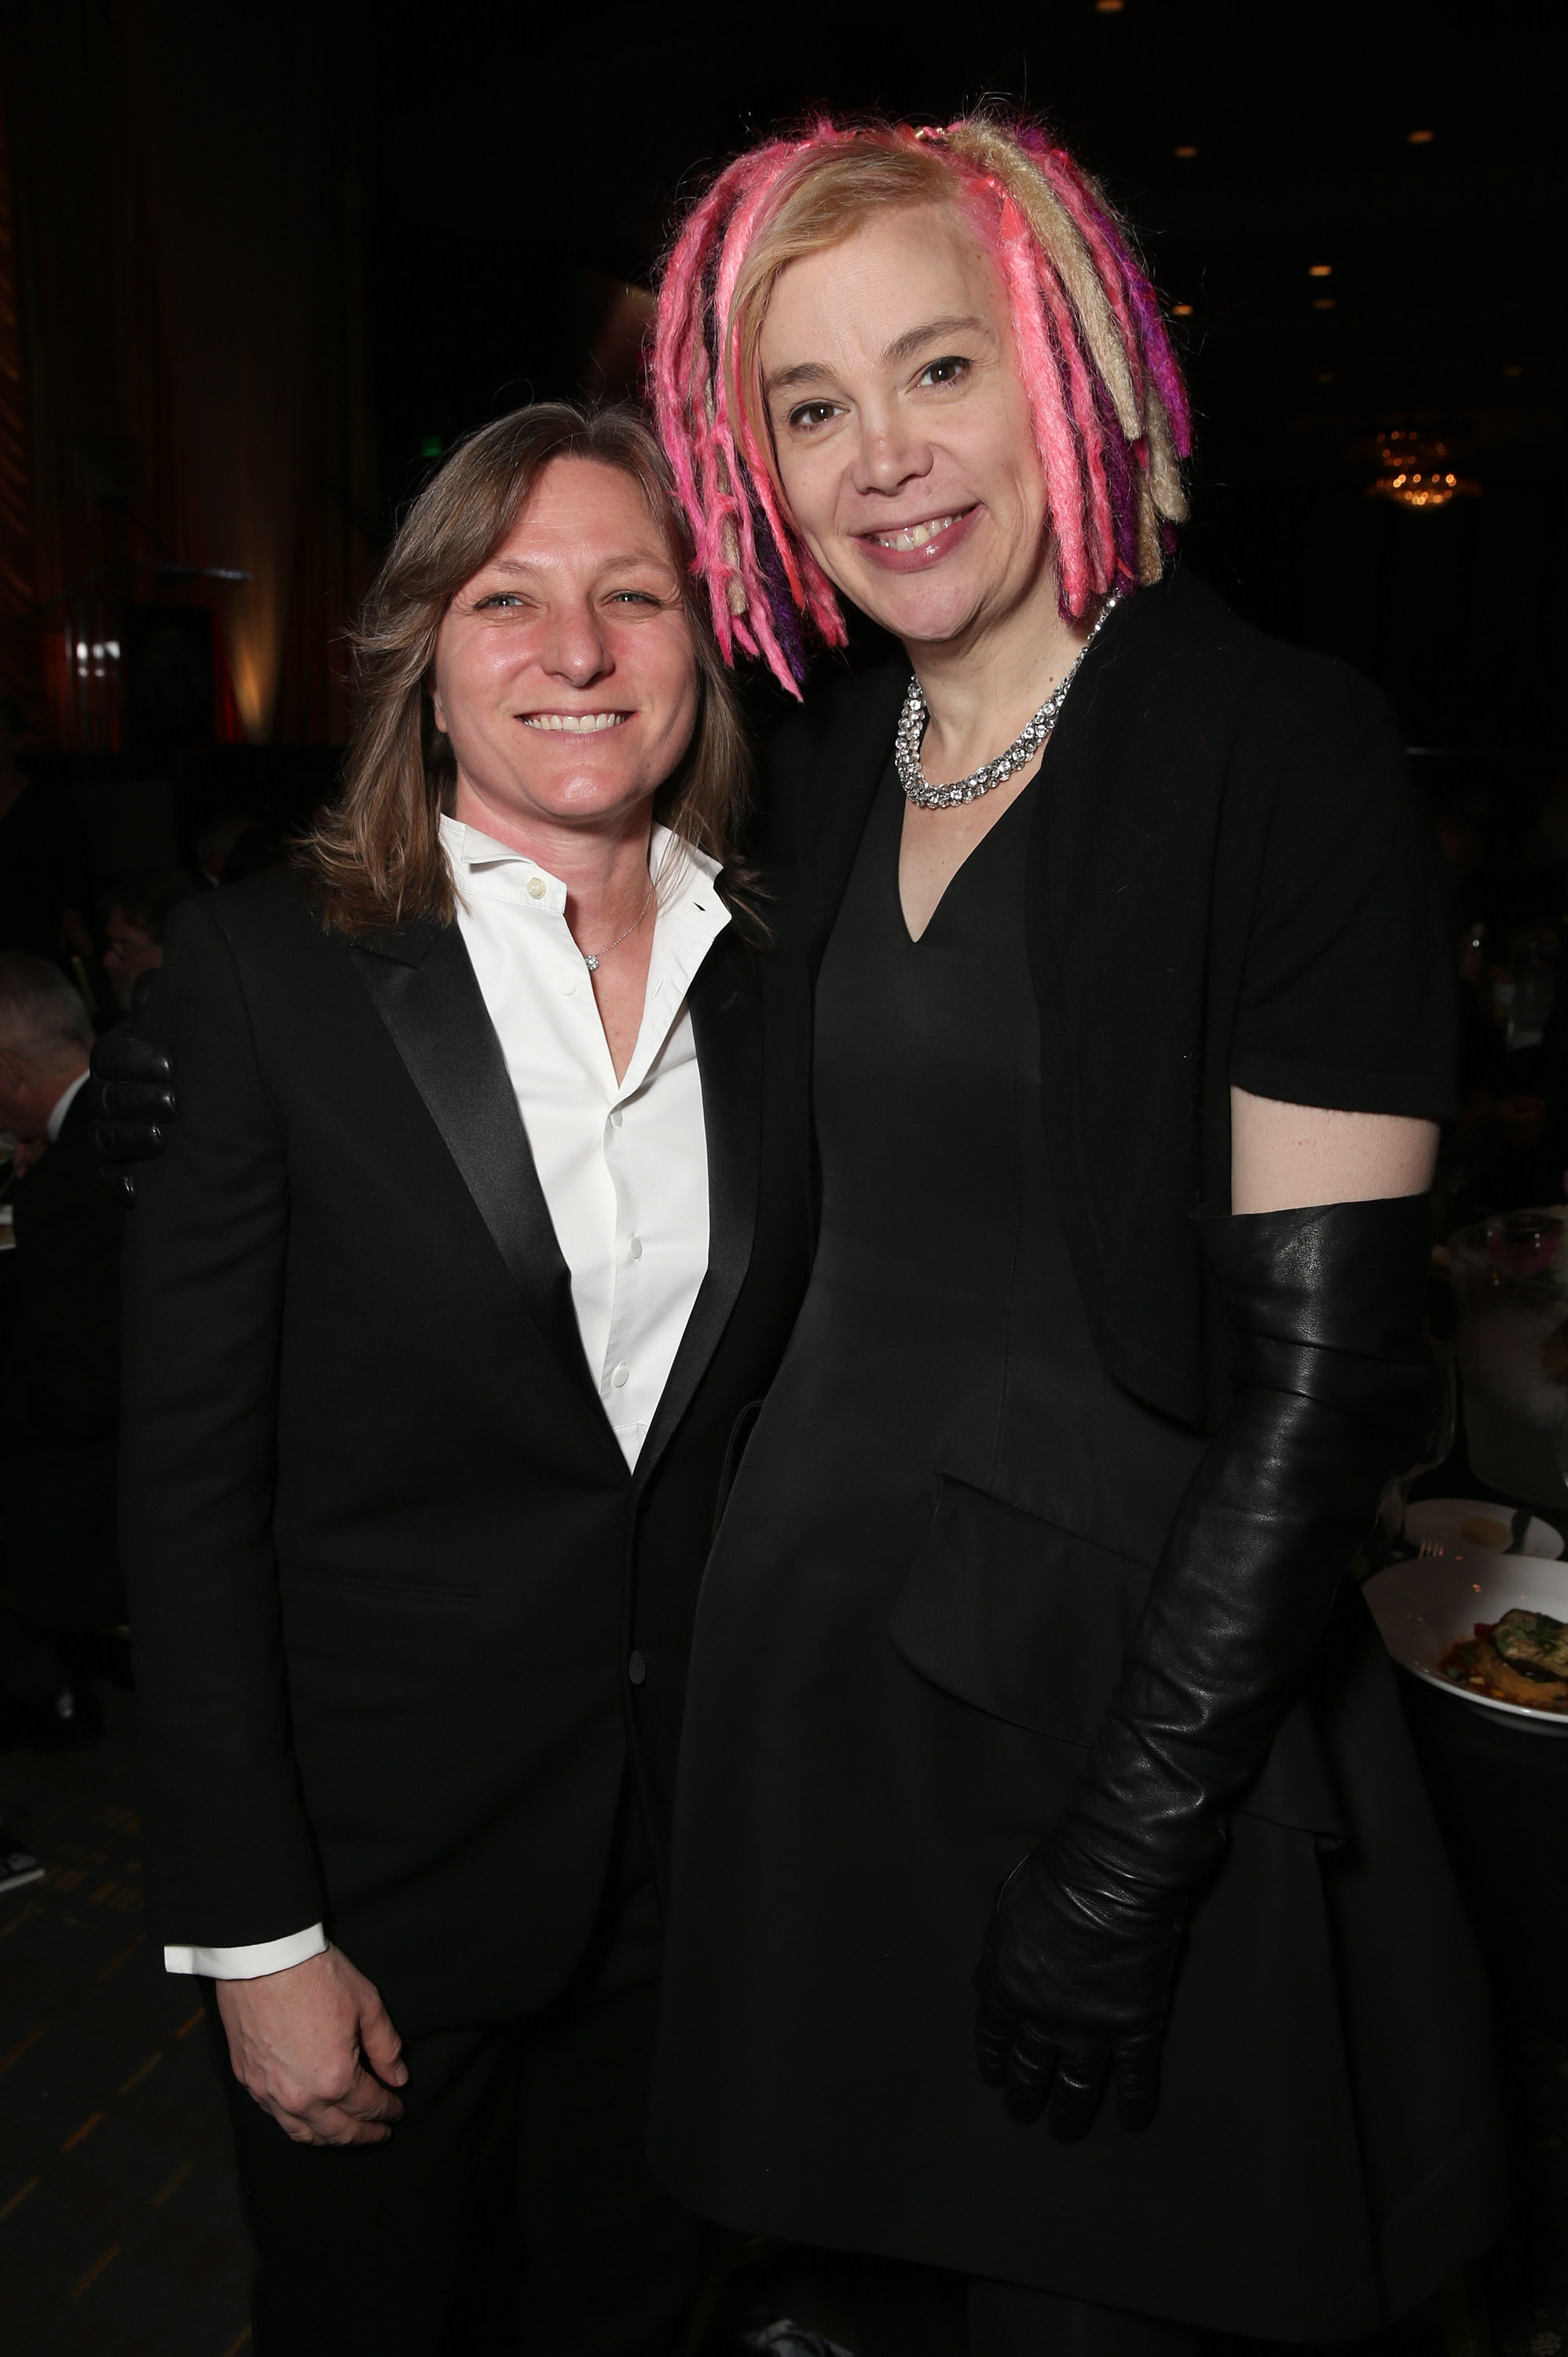 Cindy Holland and Lana Wachowski attend the 30th Annual ASC Awards on February 14, 2016 in Los Angeles, California. | Source: Getty Images